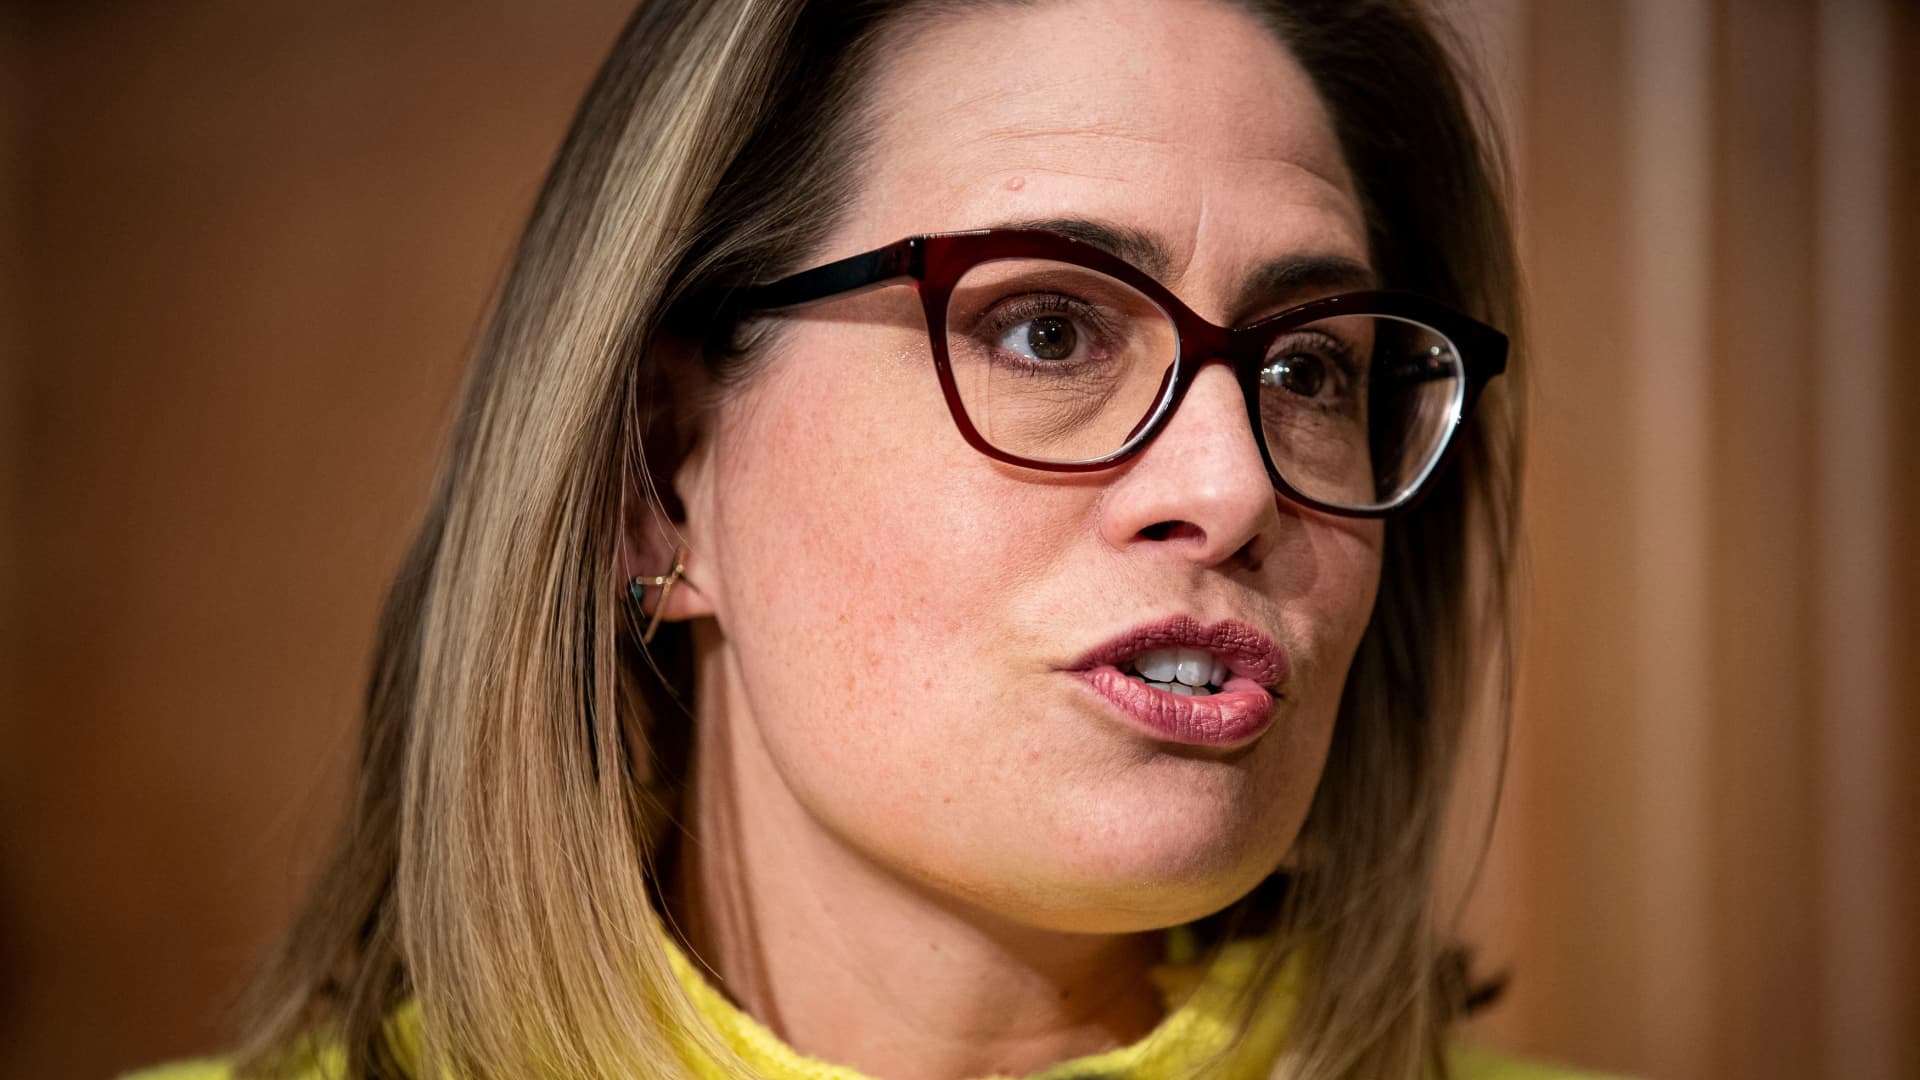 Sen. Sinema’s switch to Independent will not impact Democrats’ control